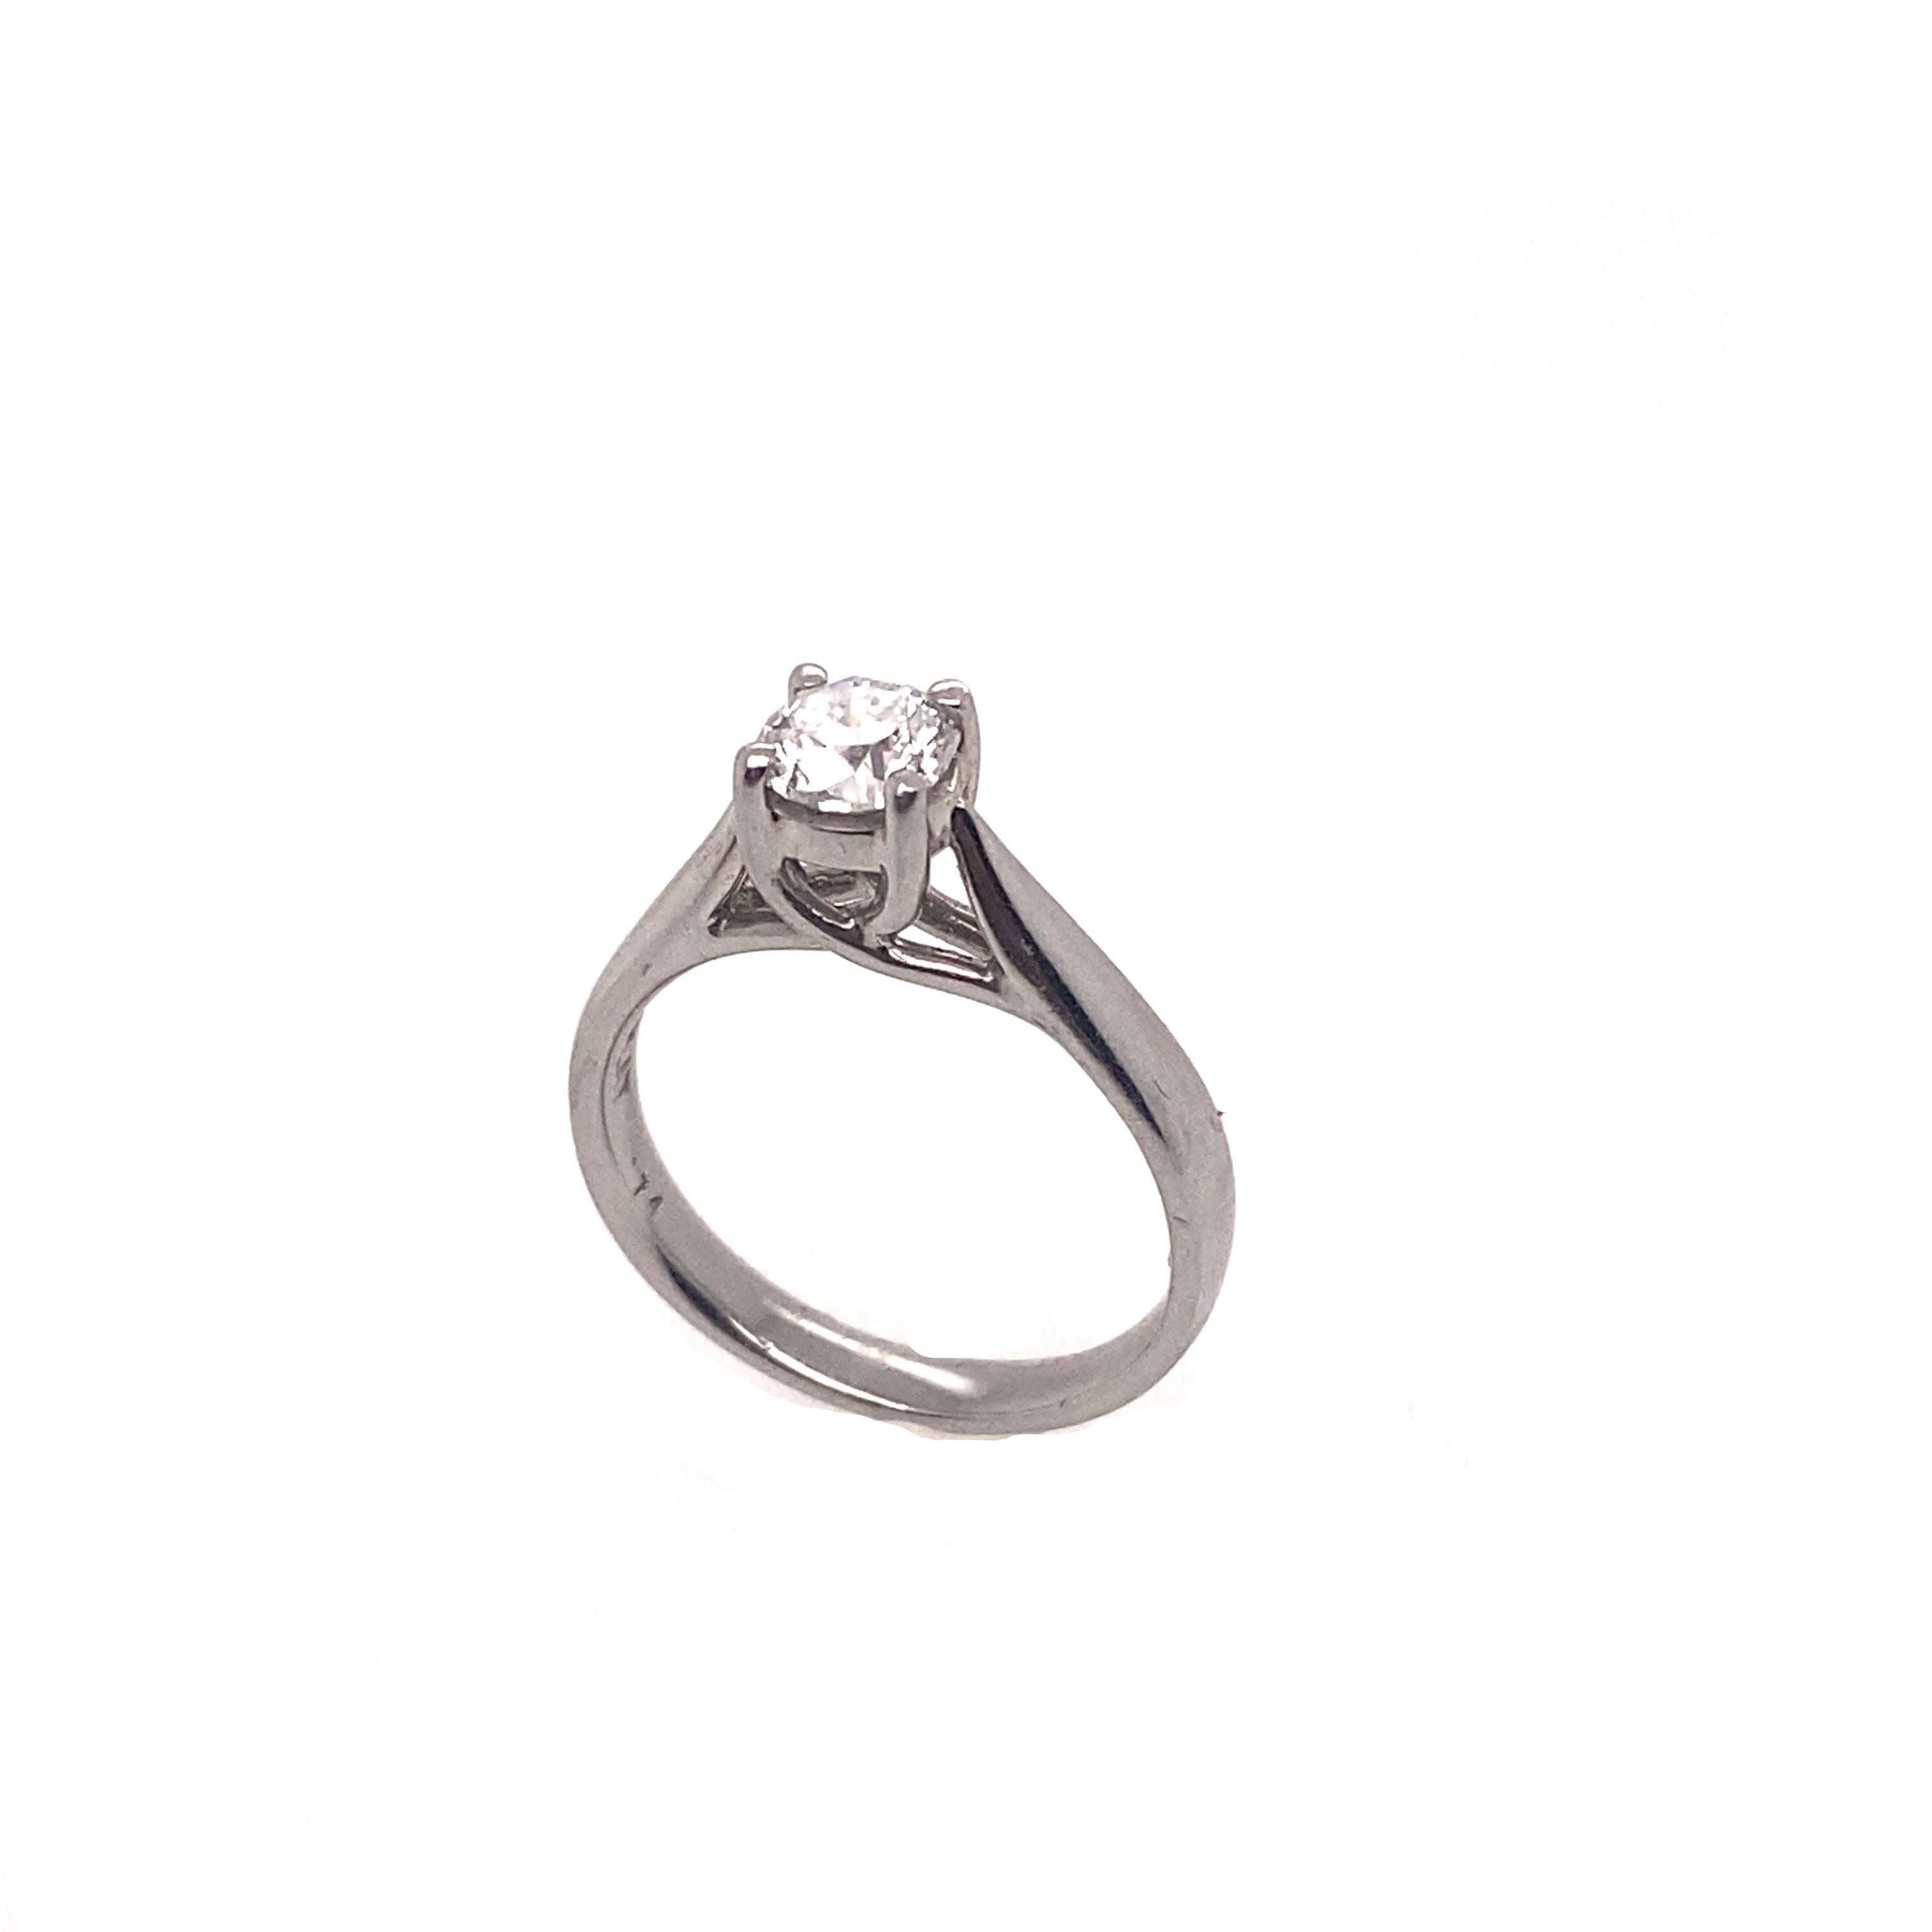 0.75 carat brilliant round diamond is mounted in the platinum ring. Simple setting and simple look. It is perfect for who like the simple look and stay classy.  

Center Diamond Weight: 0.75 carat
Center Diamond Shape: Brilliant Round
Center Diamond